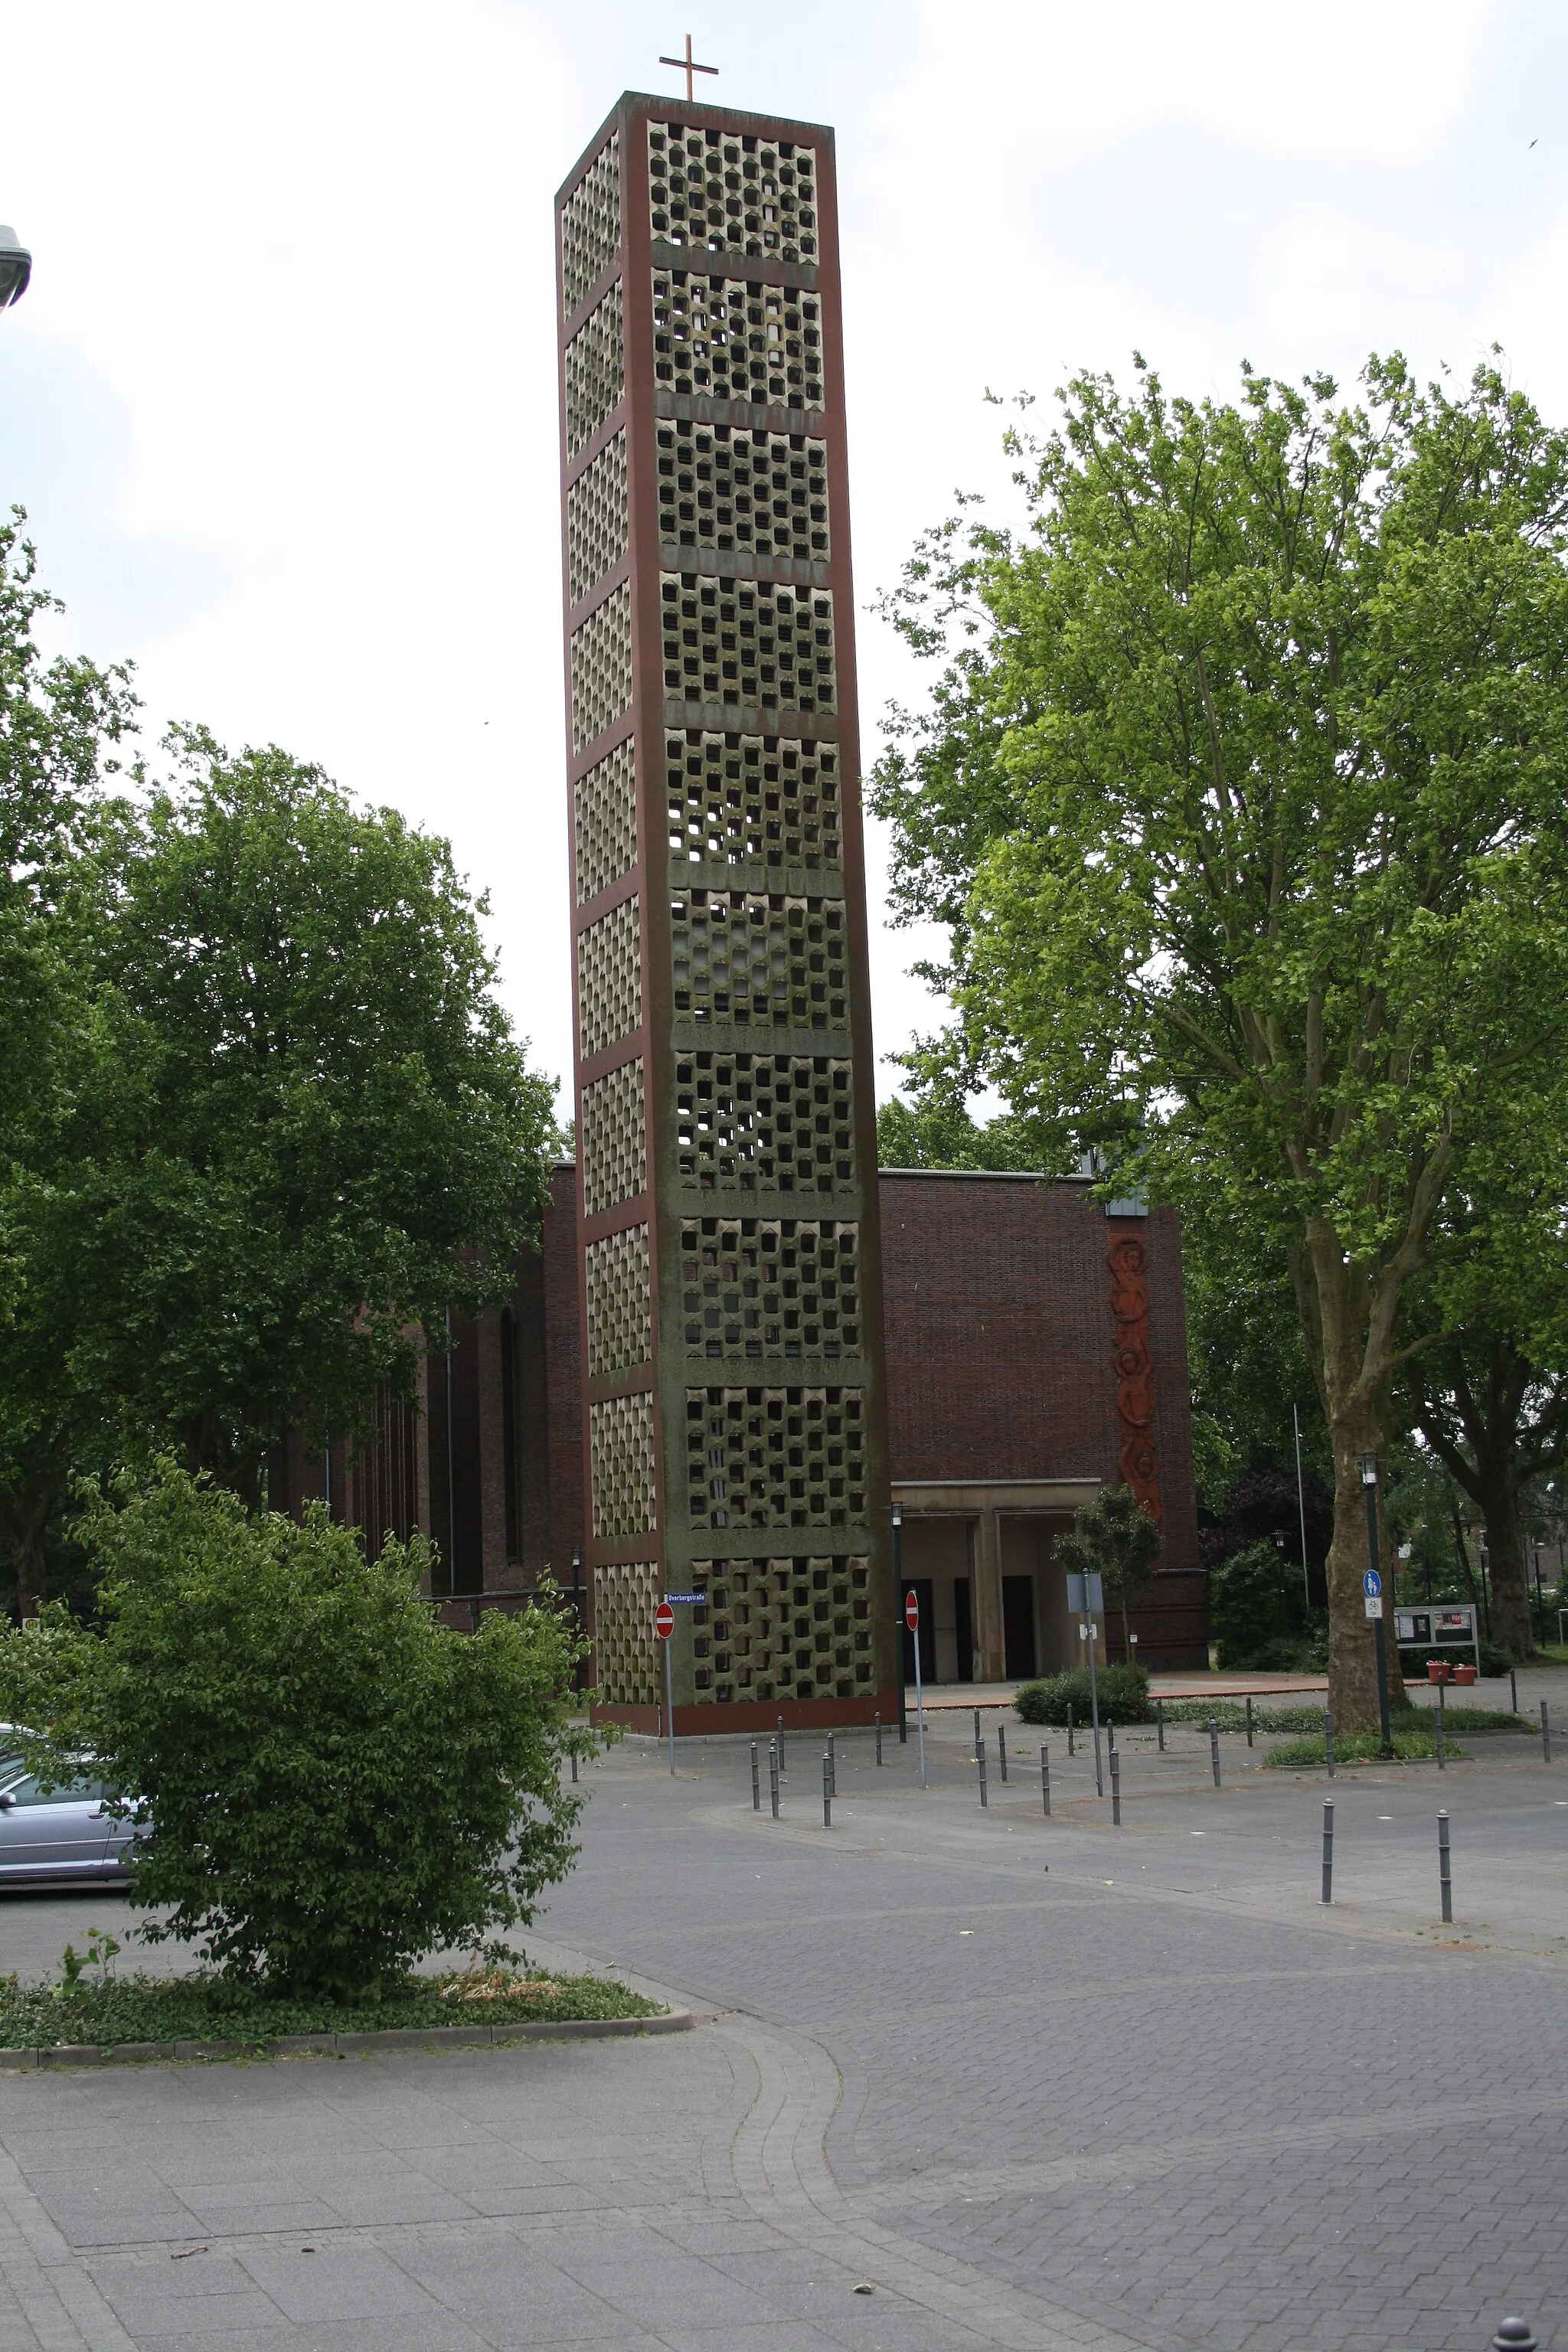 Photo showing: New St. Willibrord's church in Cleves-Kellen, North Rhine-Westphalia, Germany. With bell tower